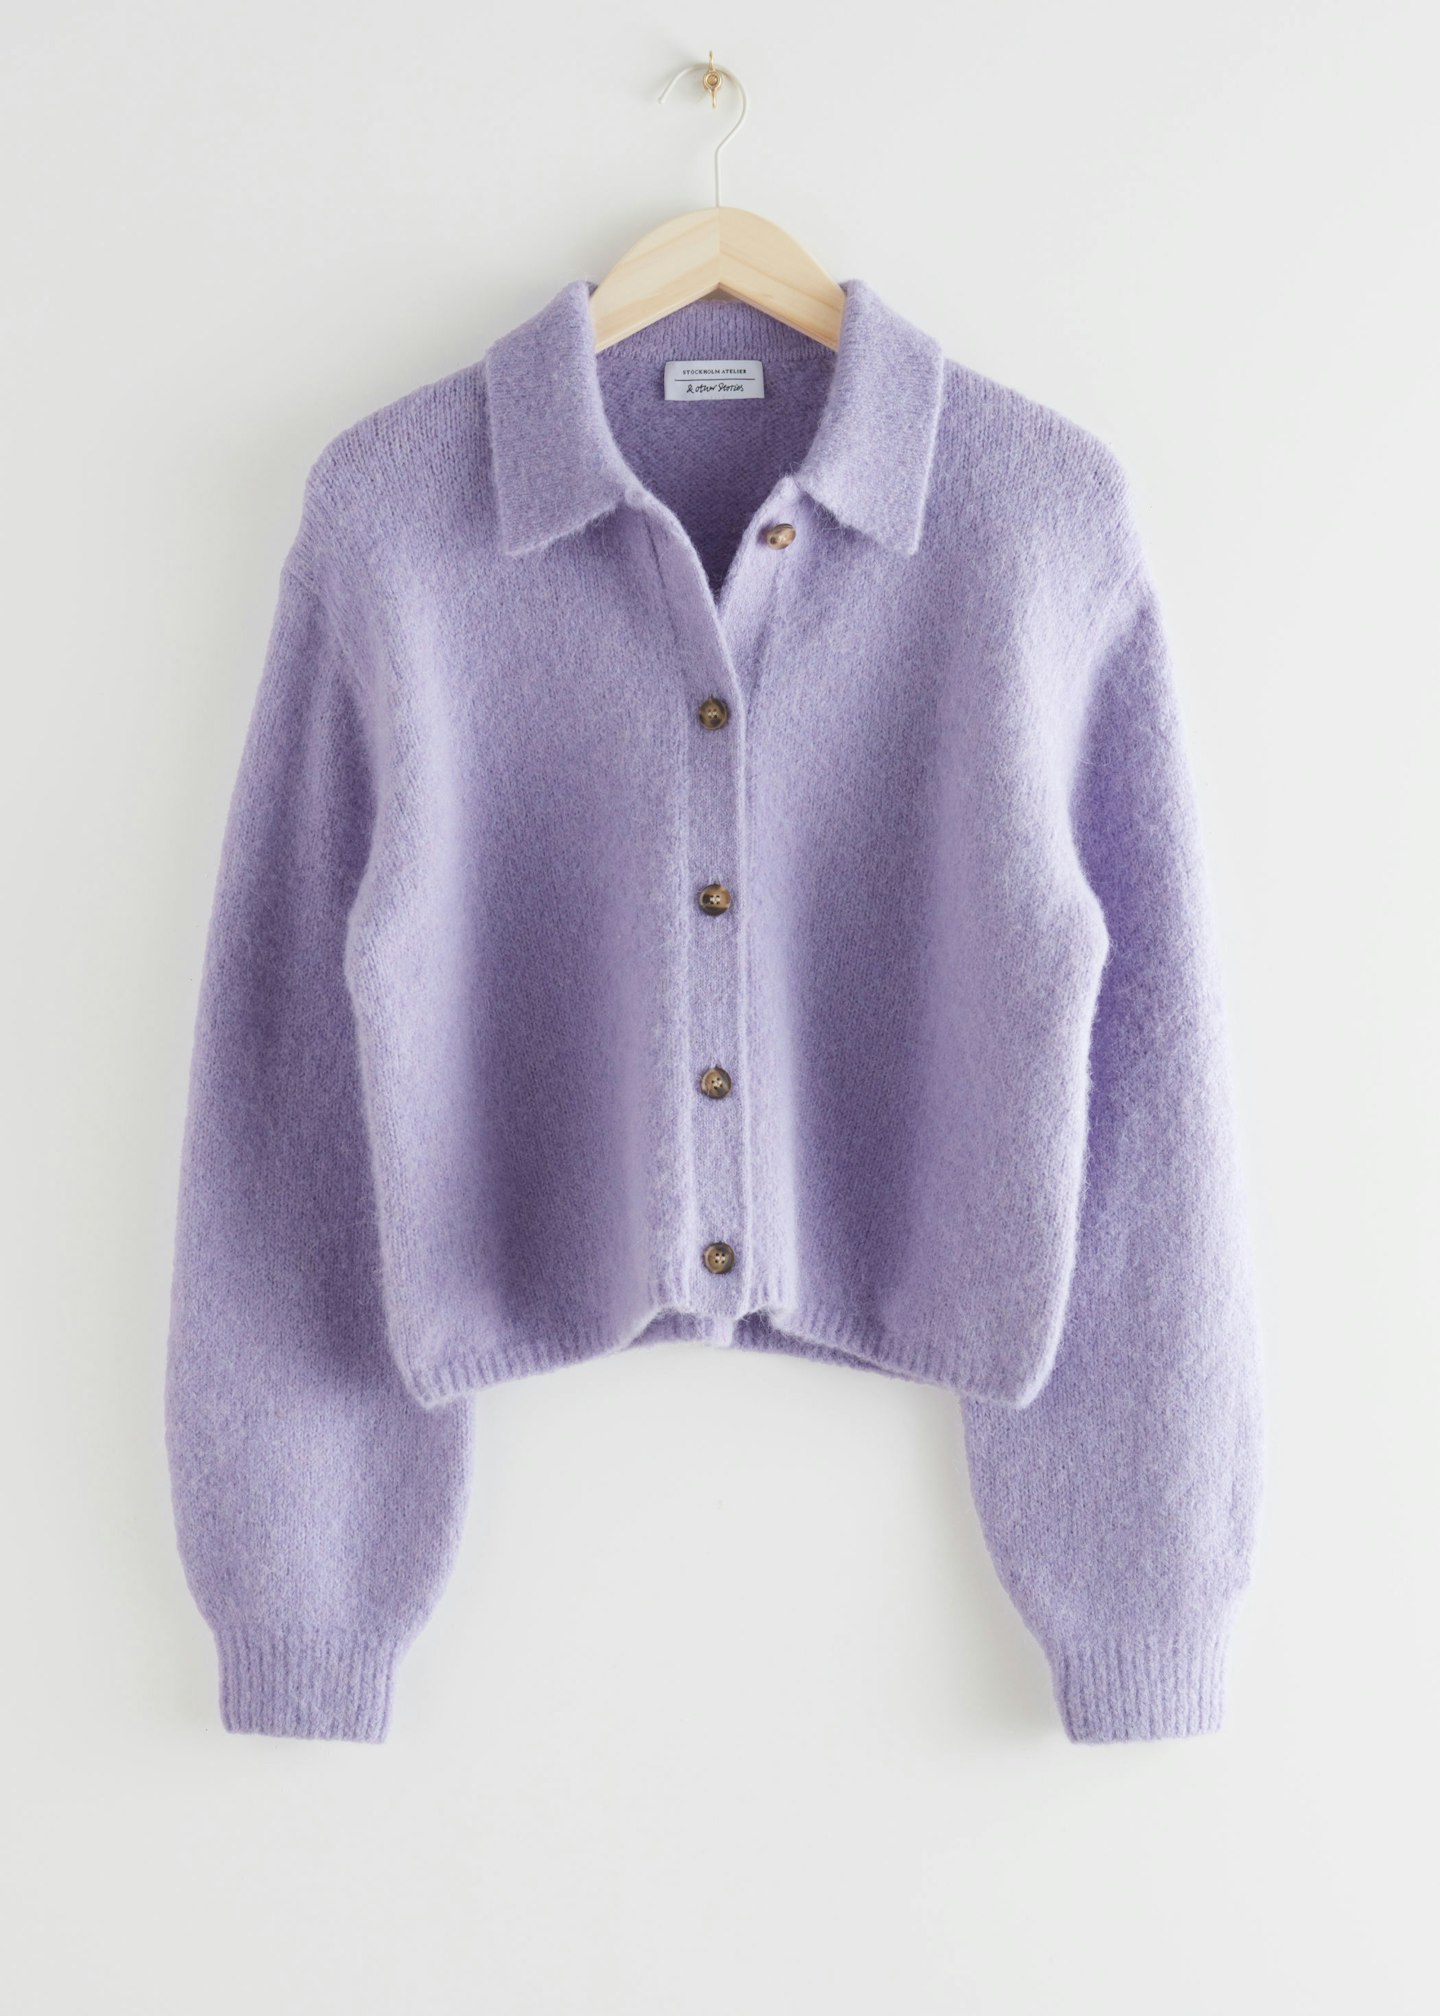 & Other Stories, Wool-Blend Tortoise Button Cardigan, £65